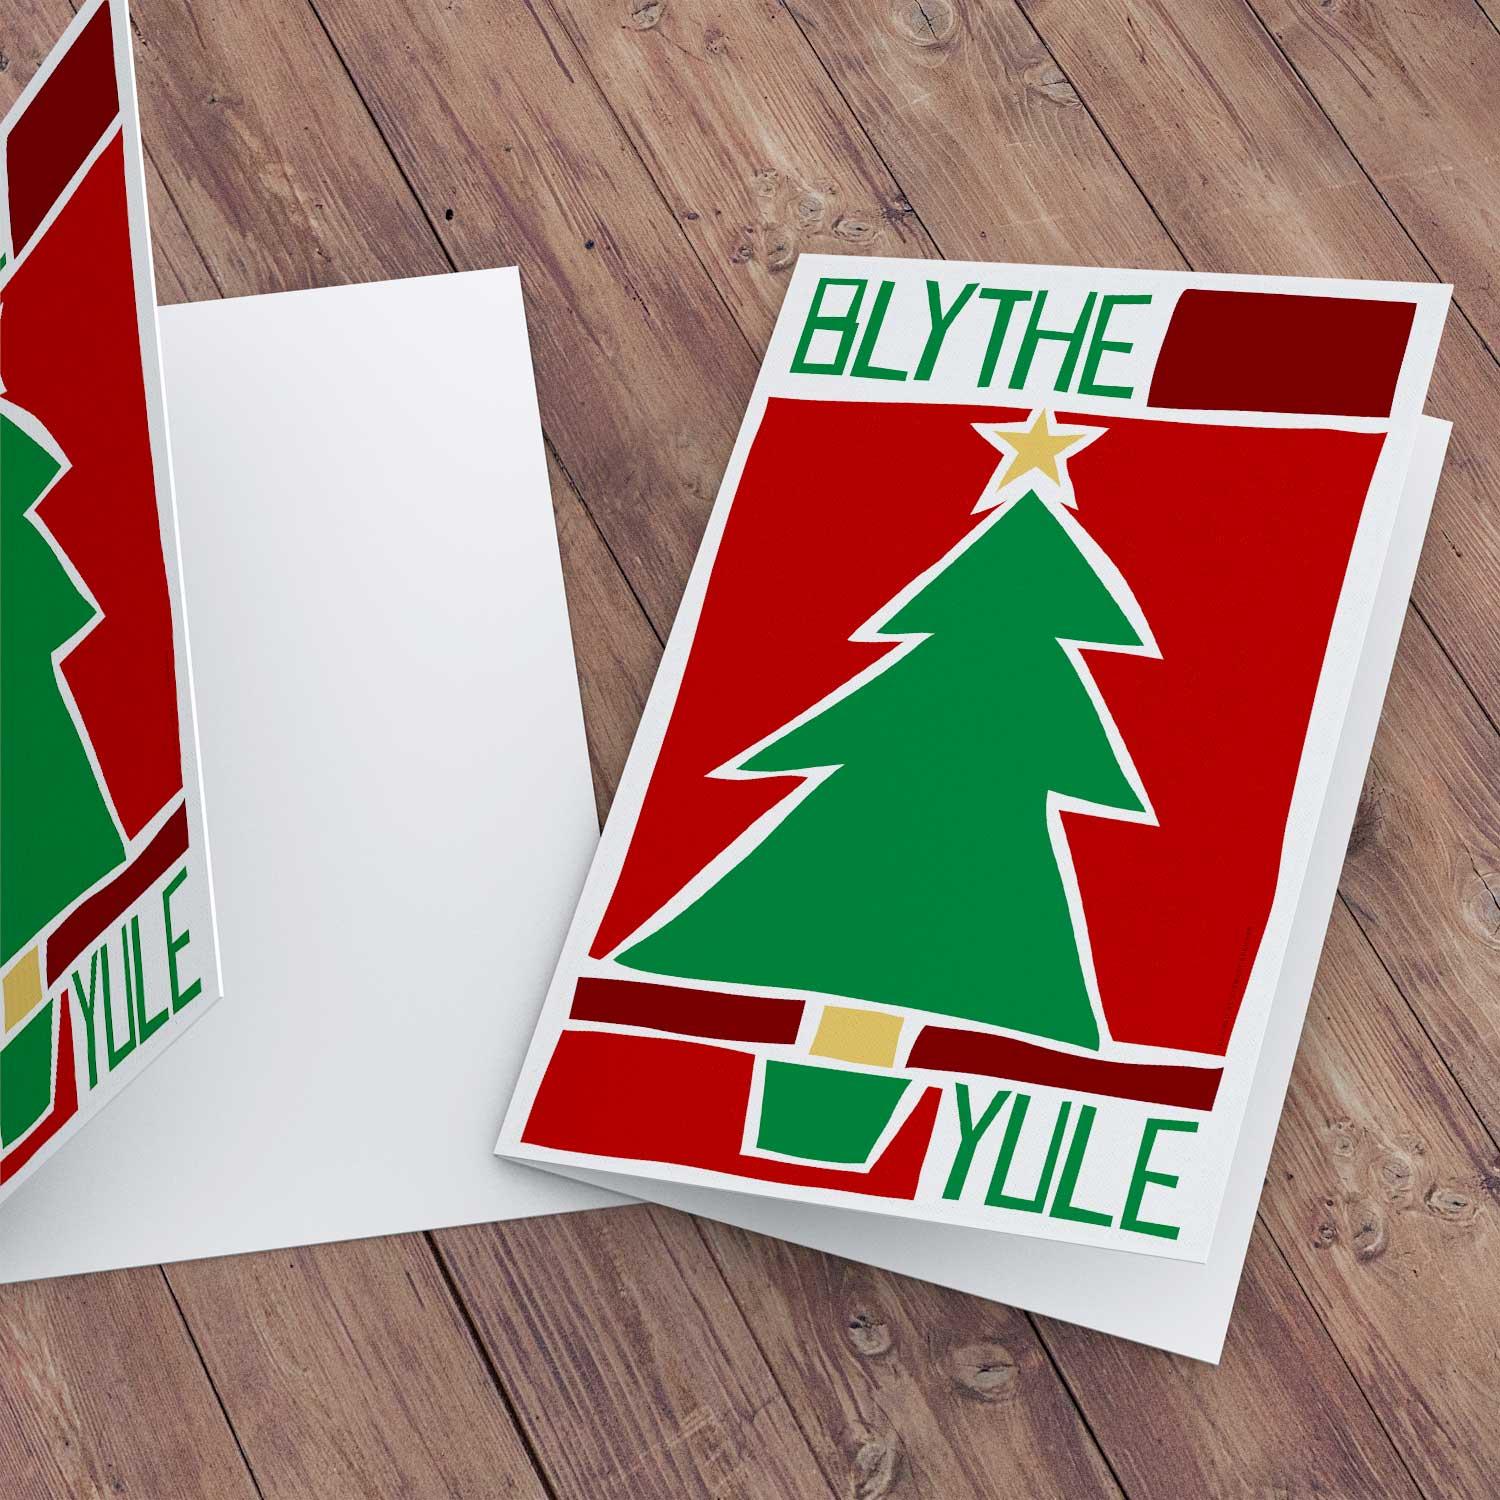 Blythe Yule Greeting Card from an original painting by artist Stewart Bremner